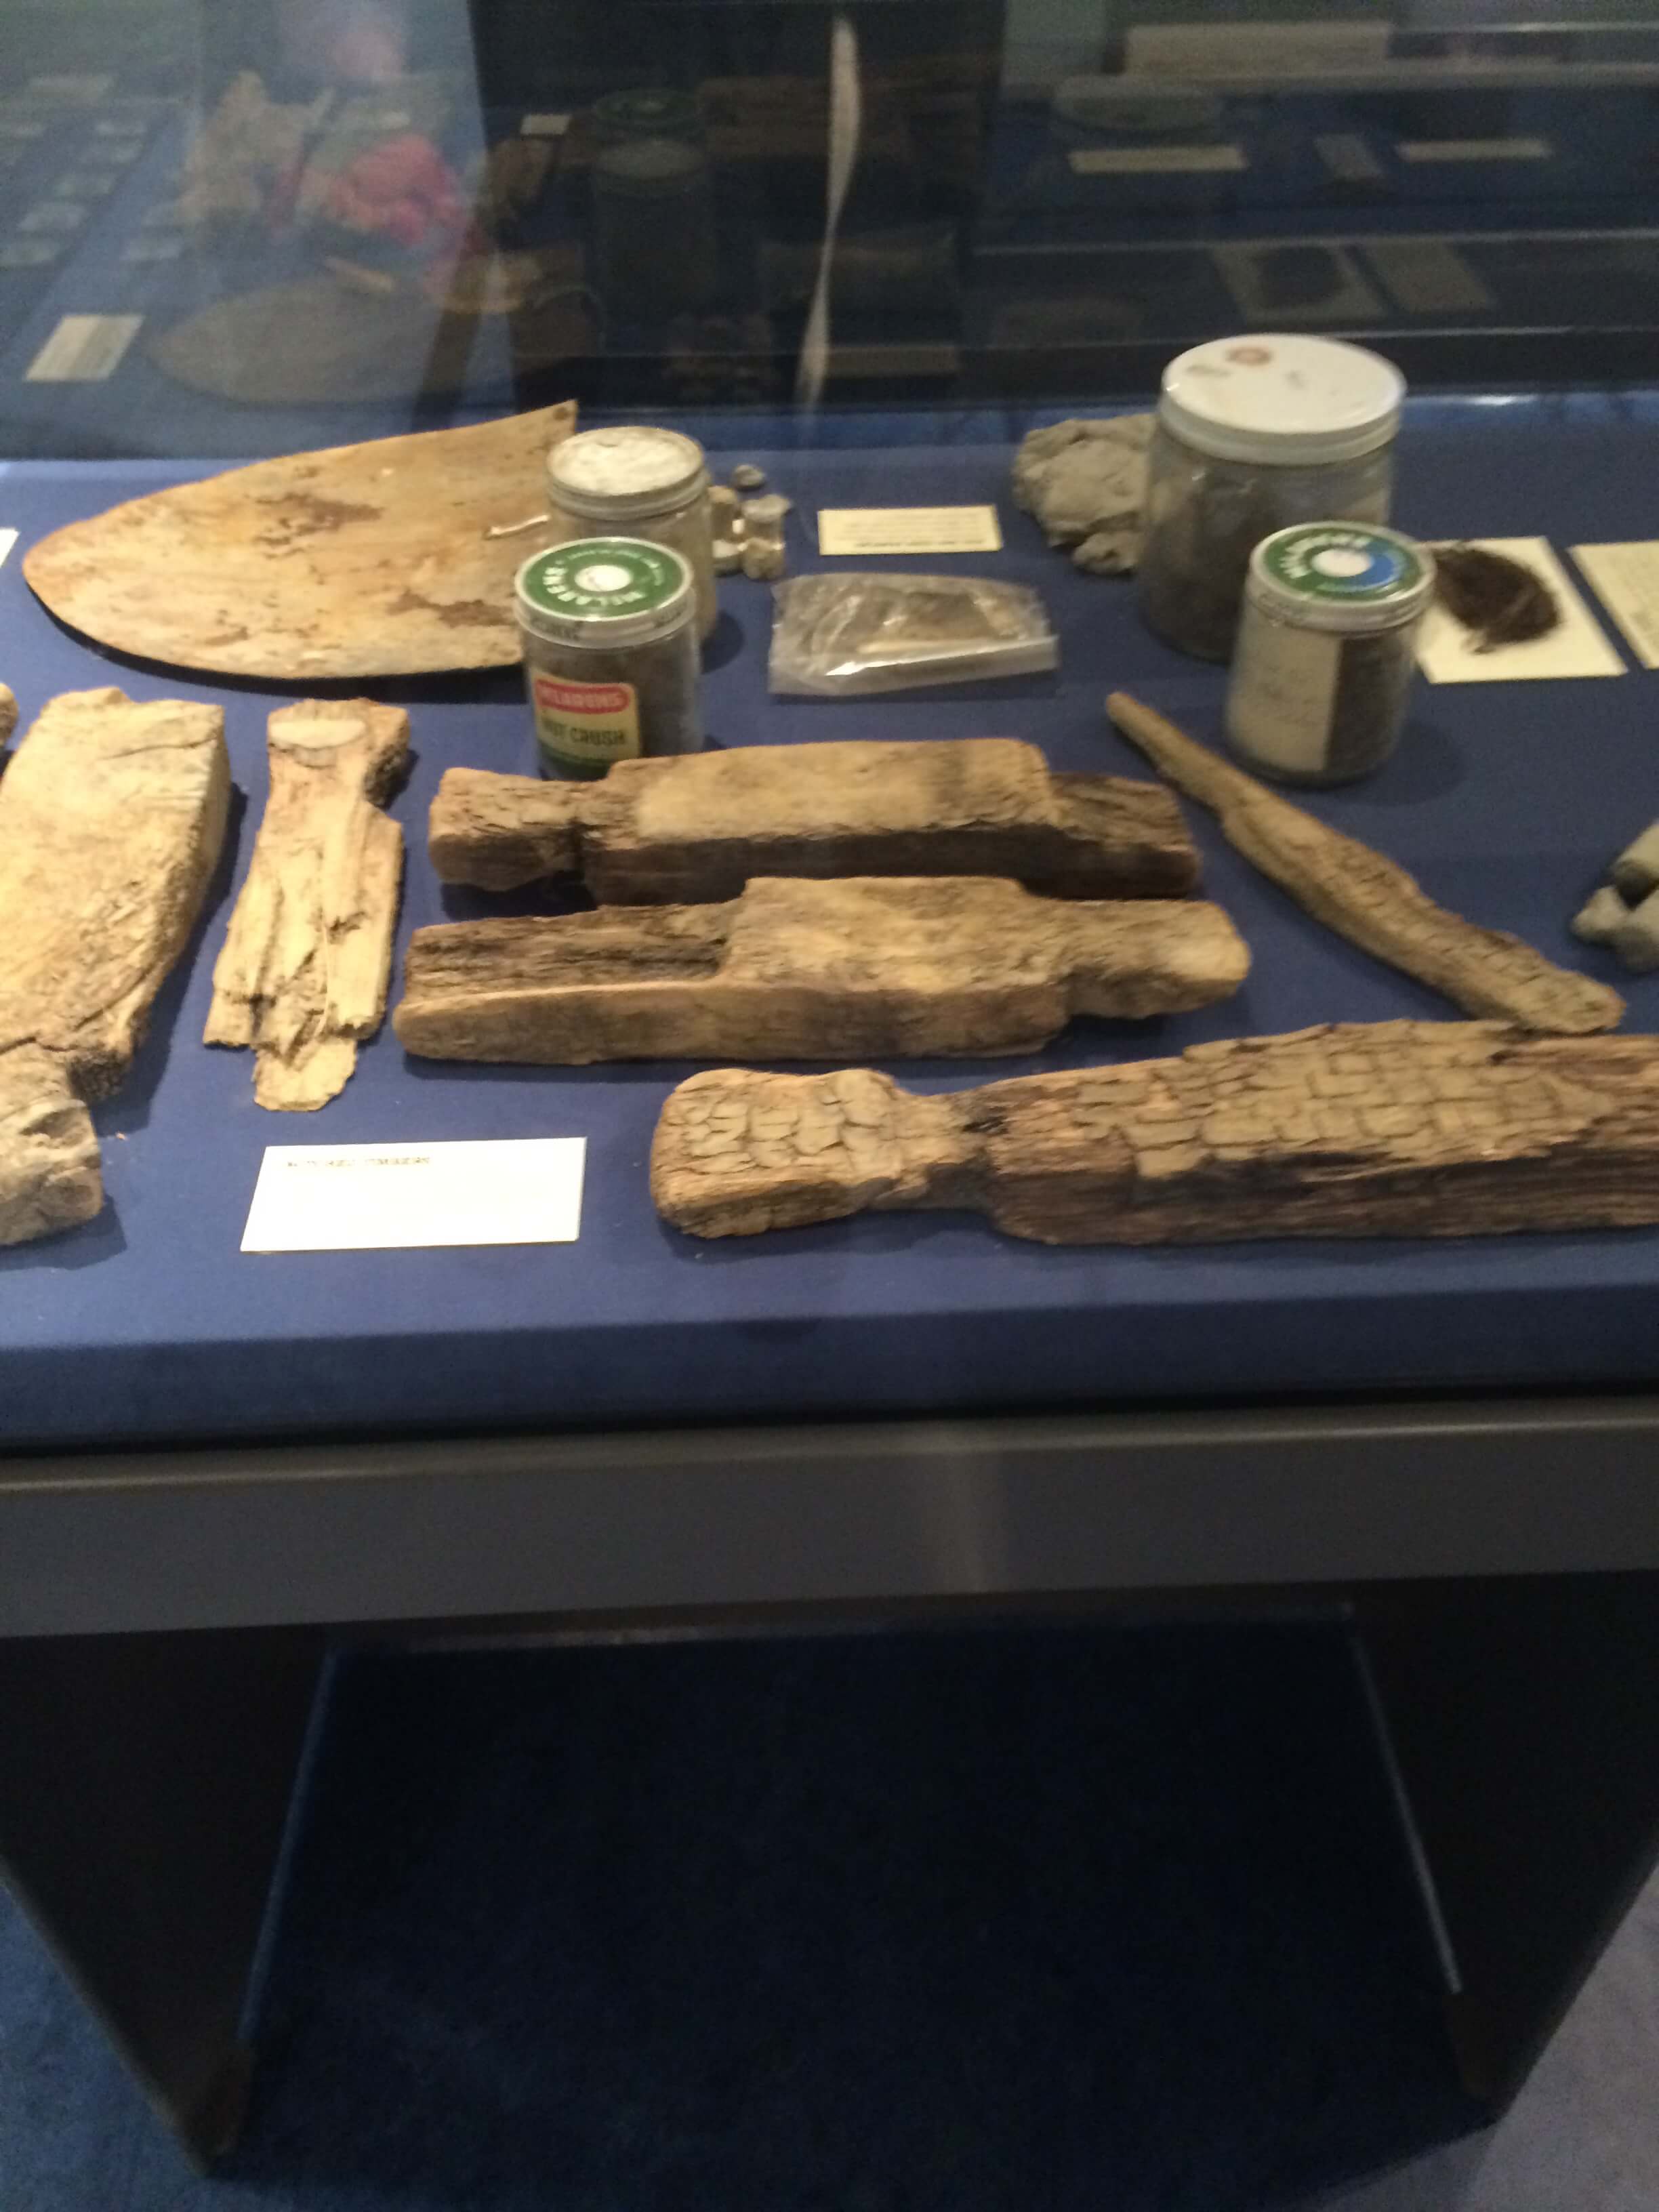 Fragments of timber previous Oak Island treasure hunters have unearthed on the island on display at the Museum of Natural History in Halifax. Image courtesy of Ryan Phillips.